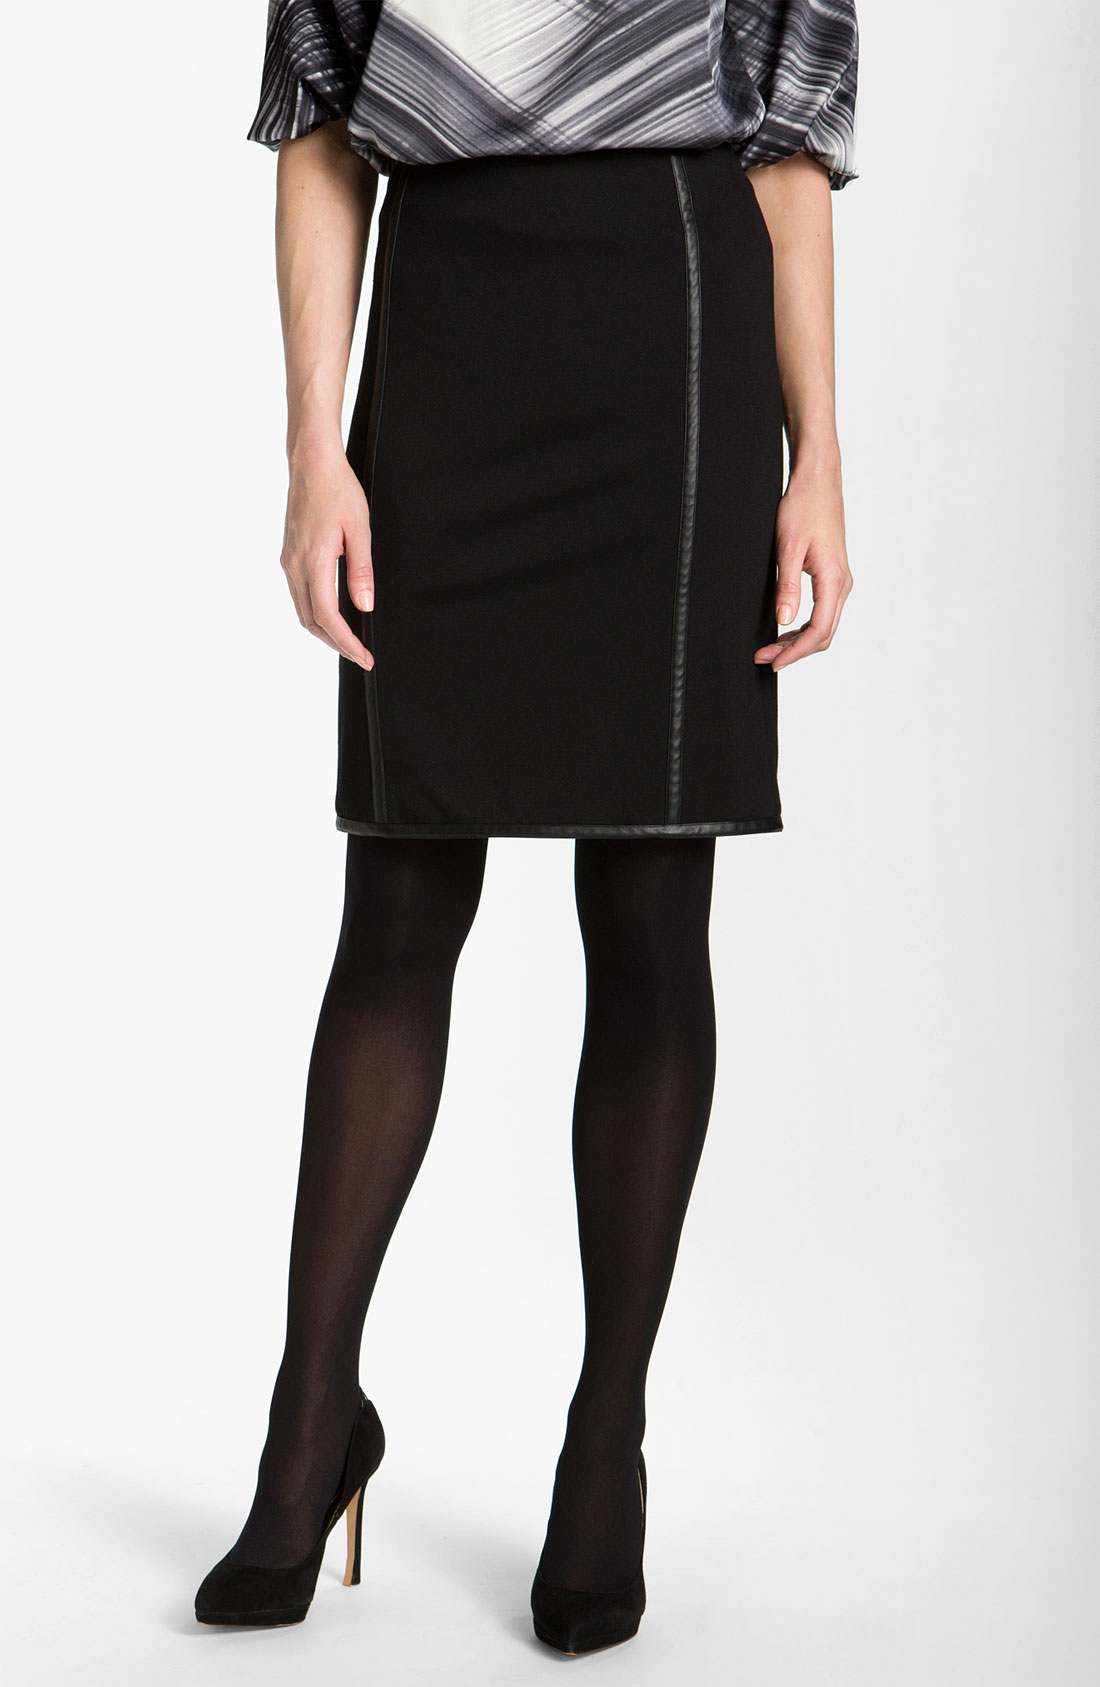 Vince Camuto Faux Leather Trim Skirt in Black (rich black) | Lyst